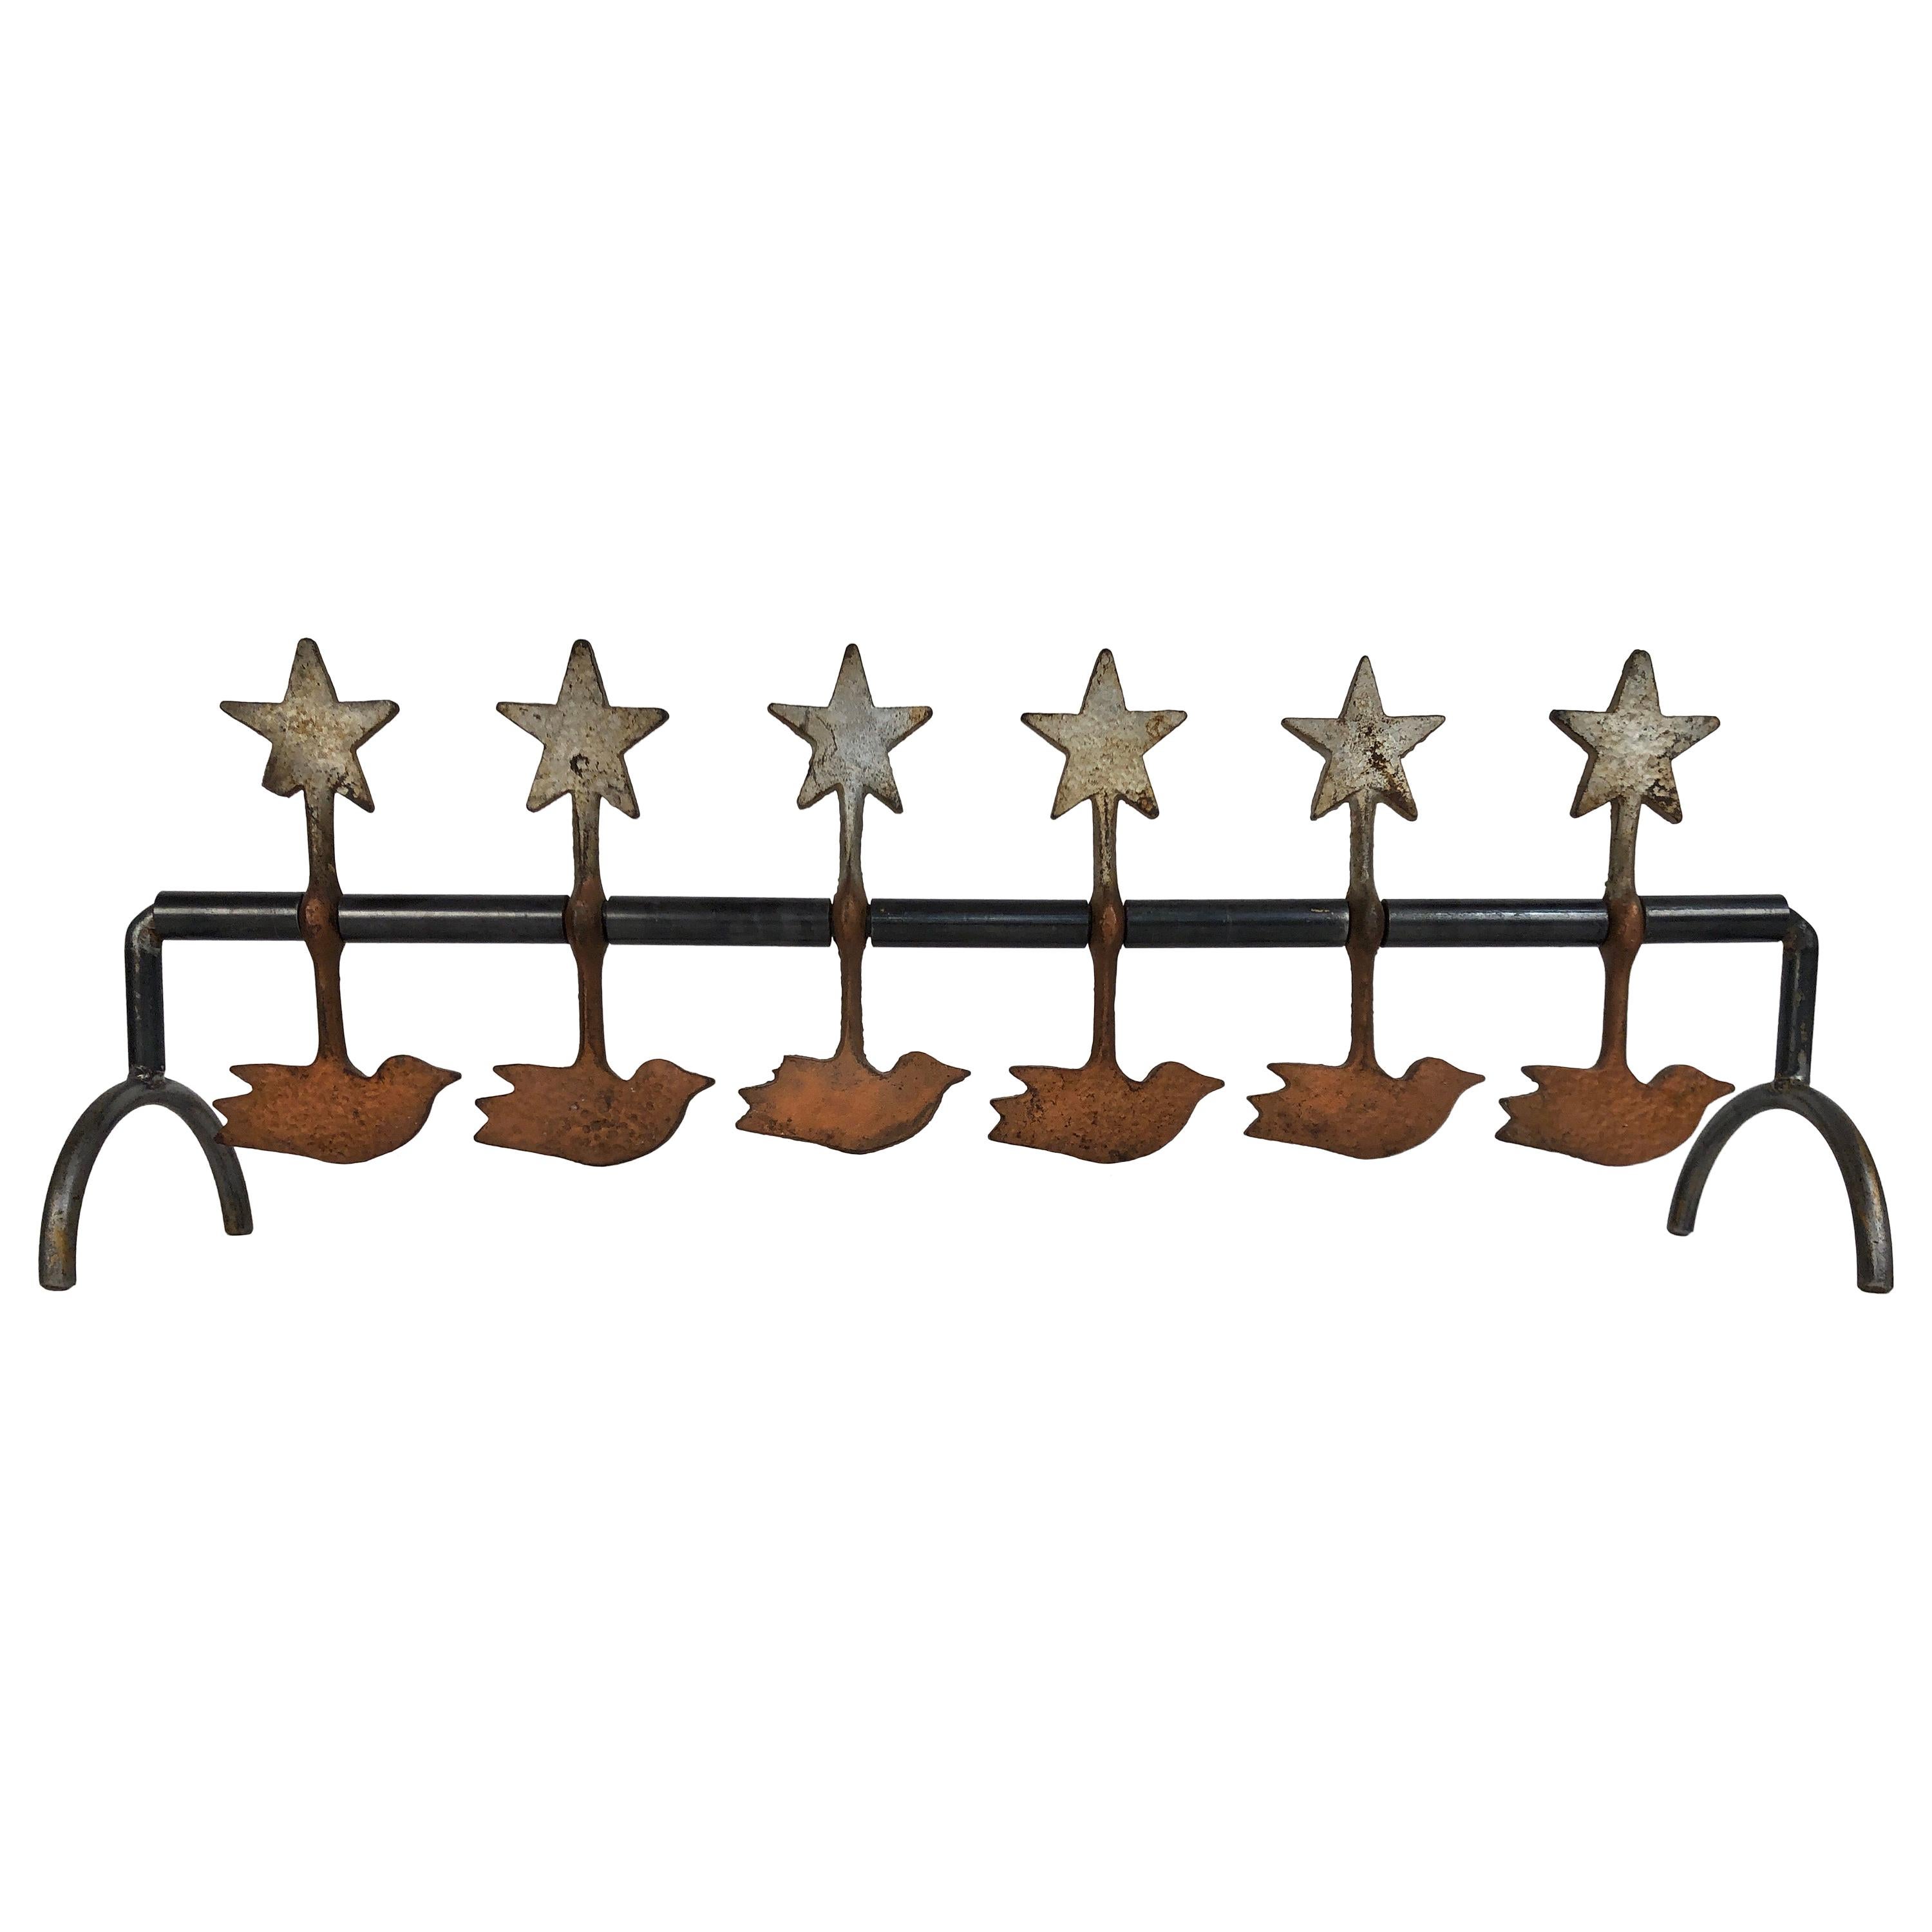 Antique Cast Iron Birds and Stars Spinning Shooting Gallery Target, Americana